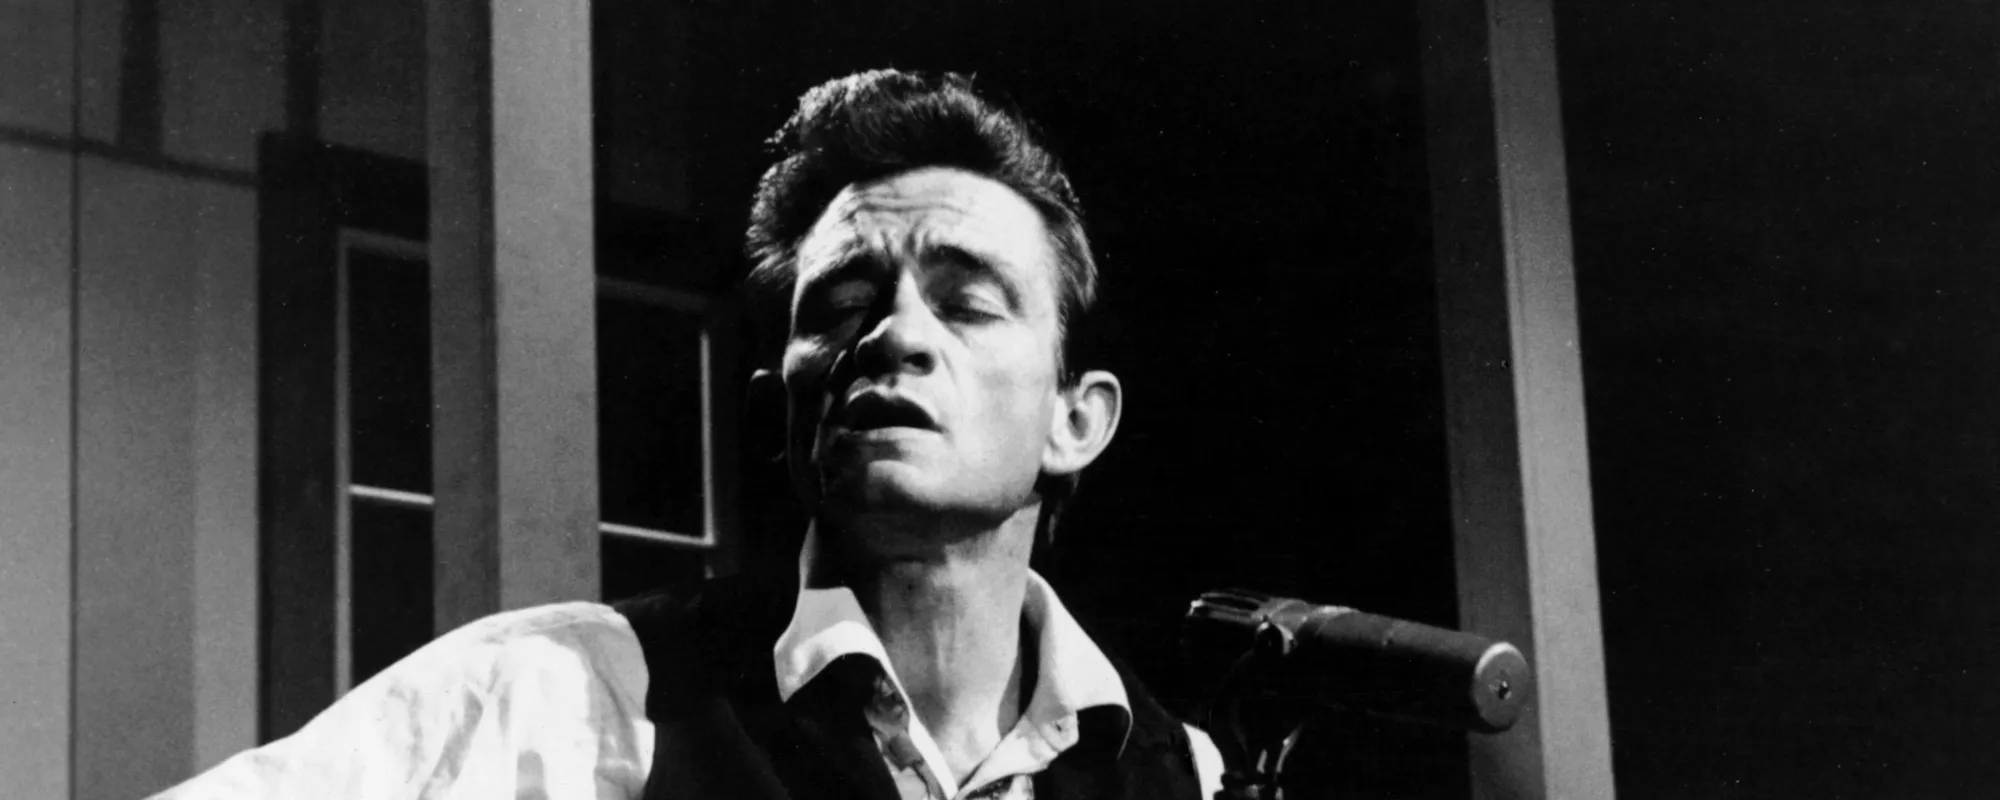 On this Day in Music History: Johnny Cash Plays His Final Performance